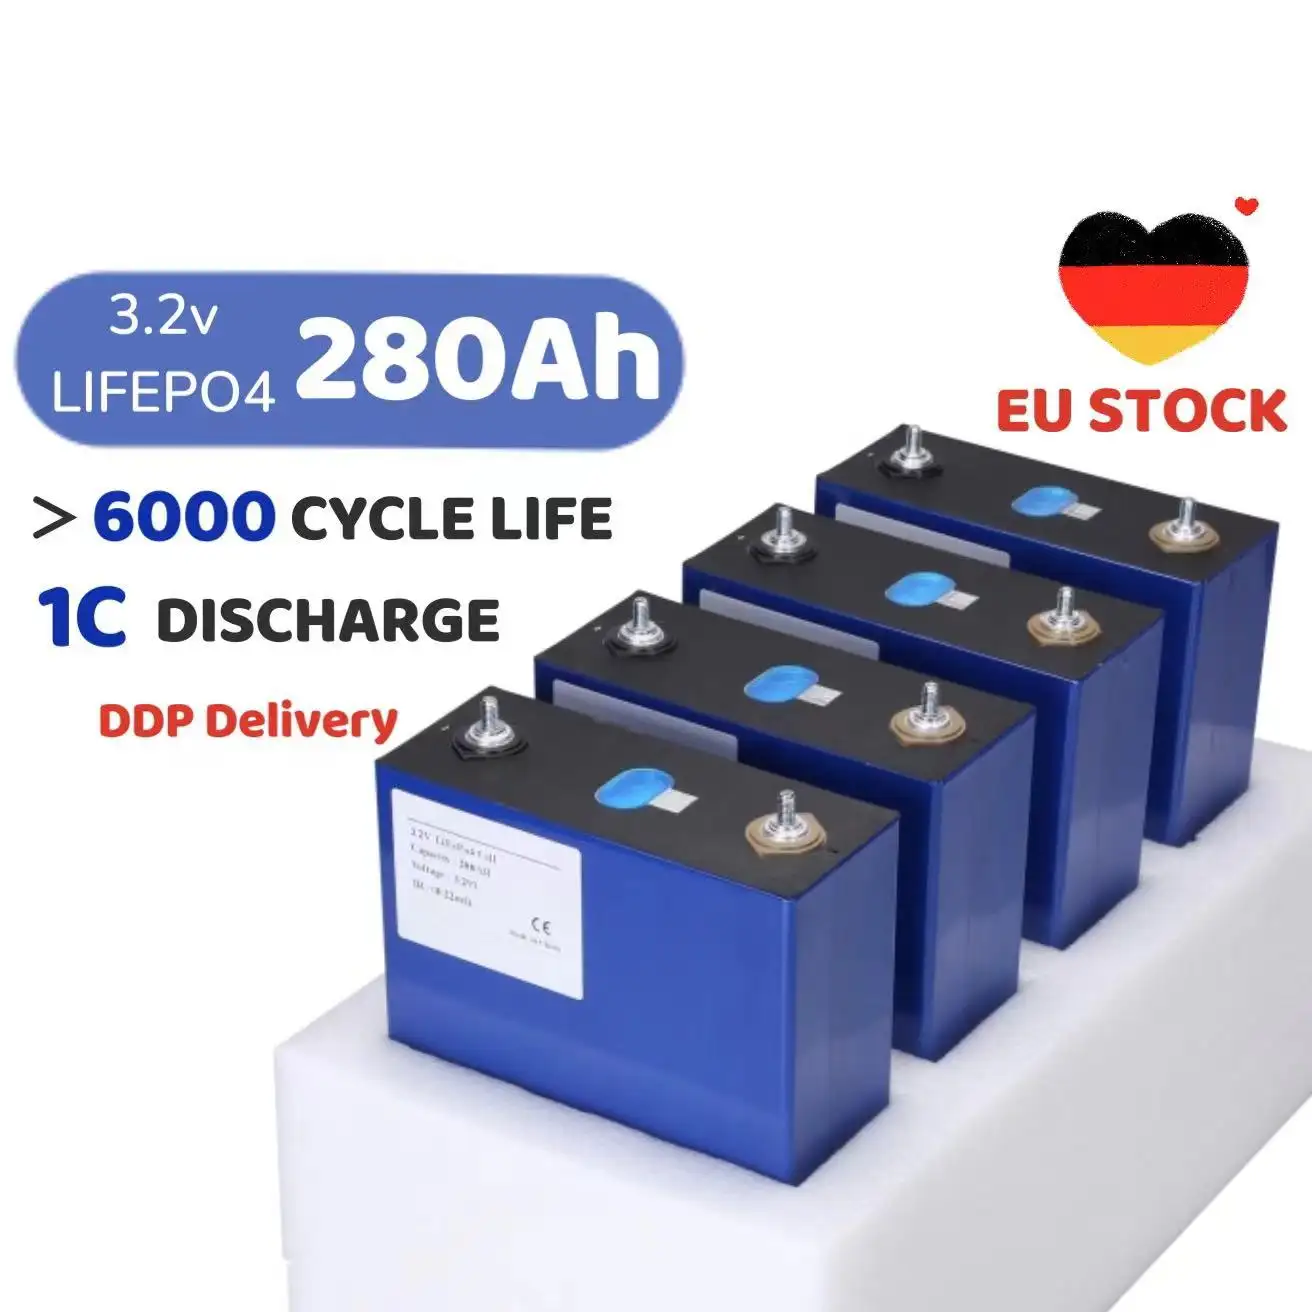 Germany EU Stock LiFePO4 LF280K 3.2V 280Ah Battery 230Ah 105Ah Prismatic Cells with 10000 Cycle Life for PV/Home Energy Storage